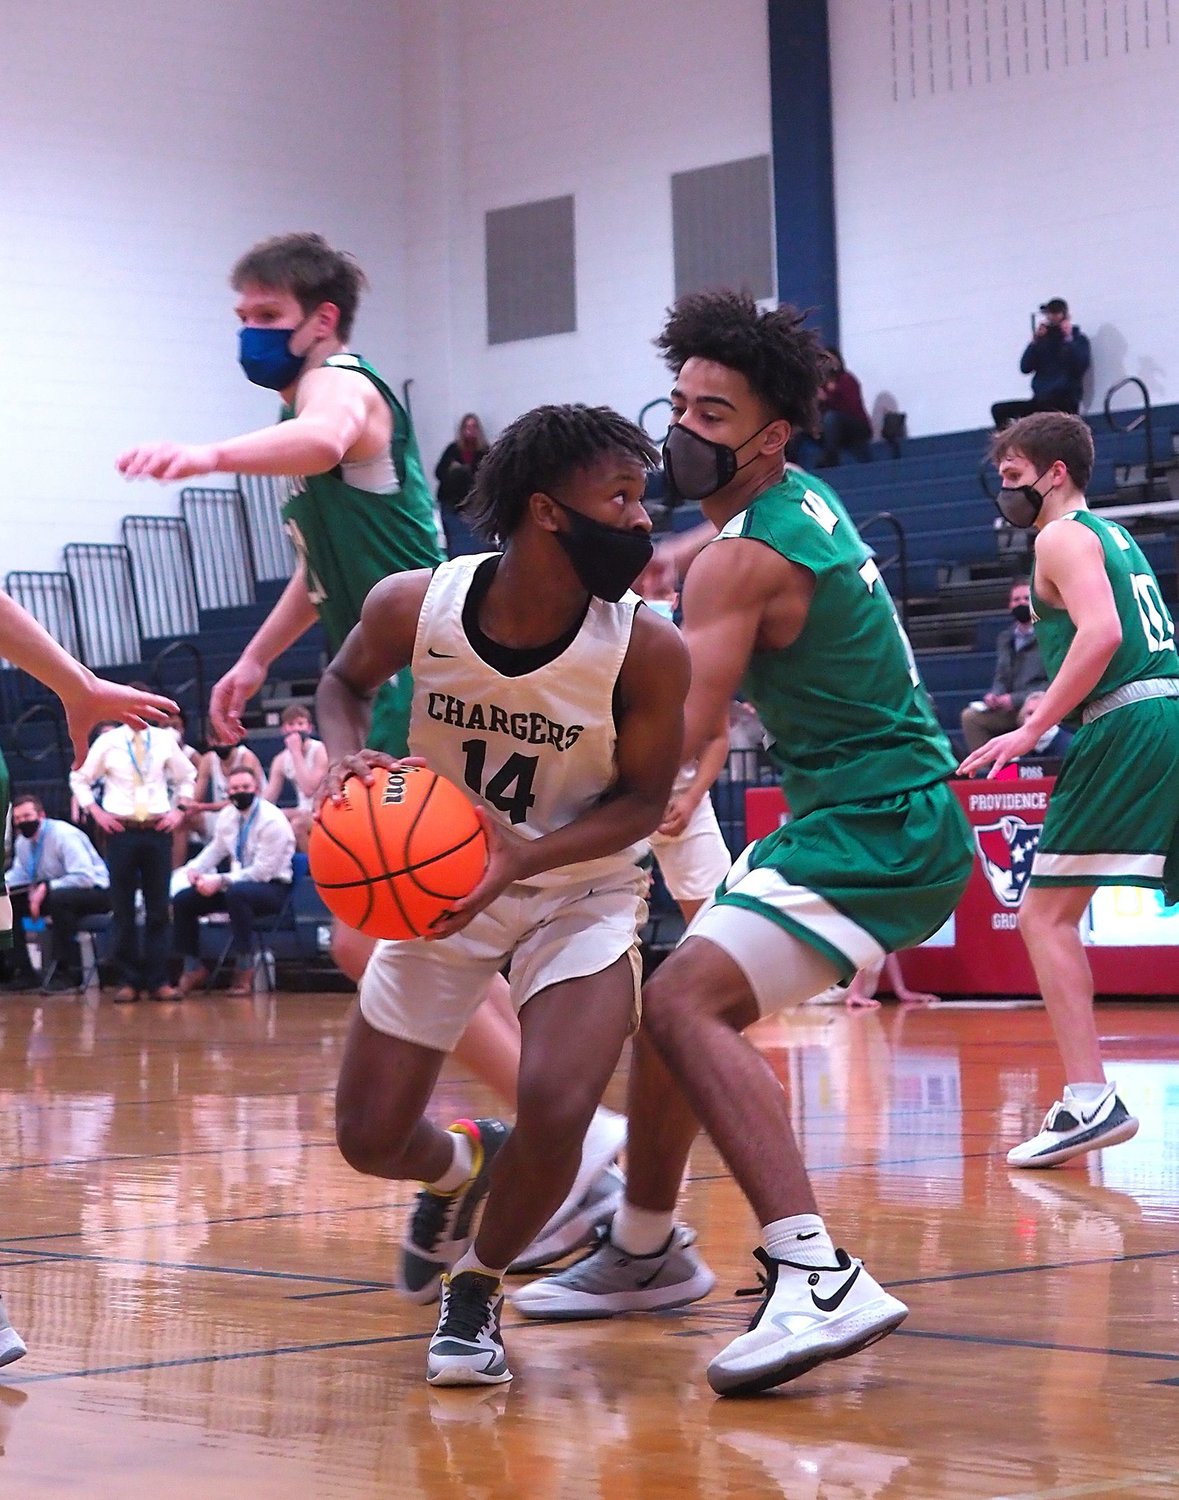 Northwood freshman guard Fred Whitaker (14) pivots just outside of the paint in his team's loss to Weddington, 56-47, on Saturday. Whitaker finished the day with 12 points and 6 assists.